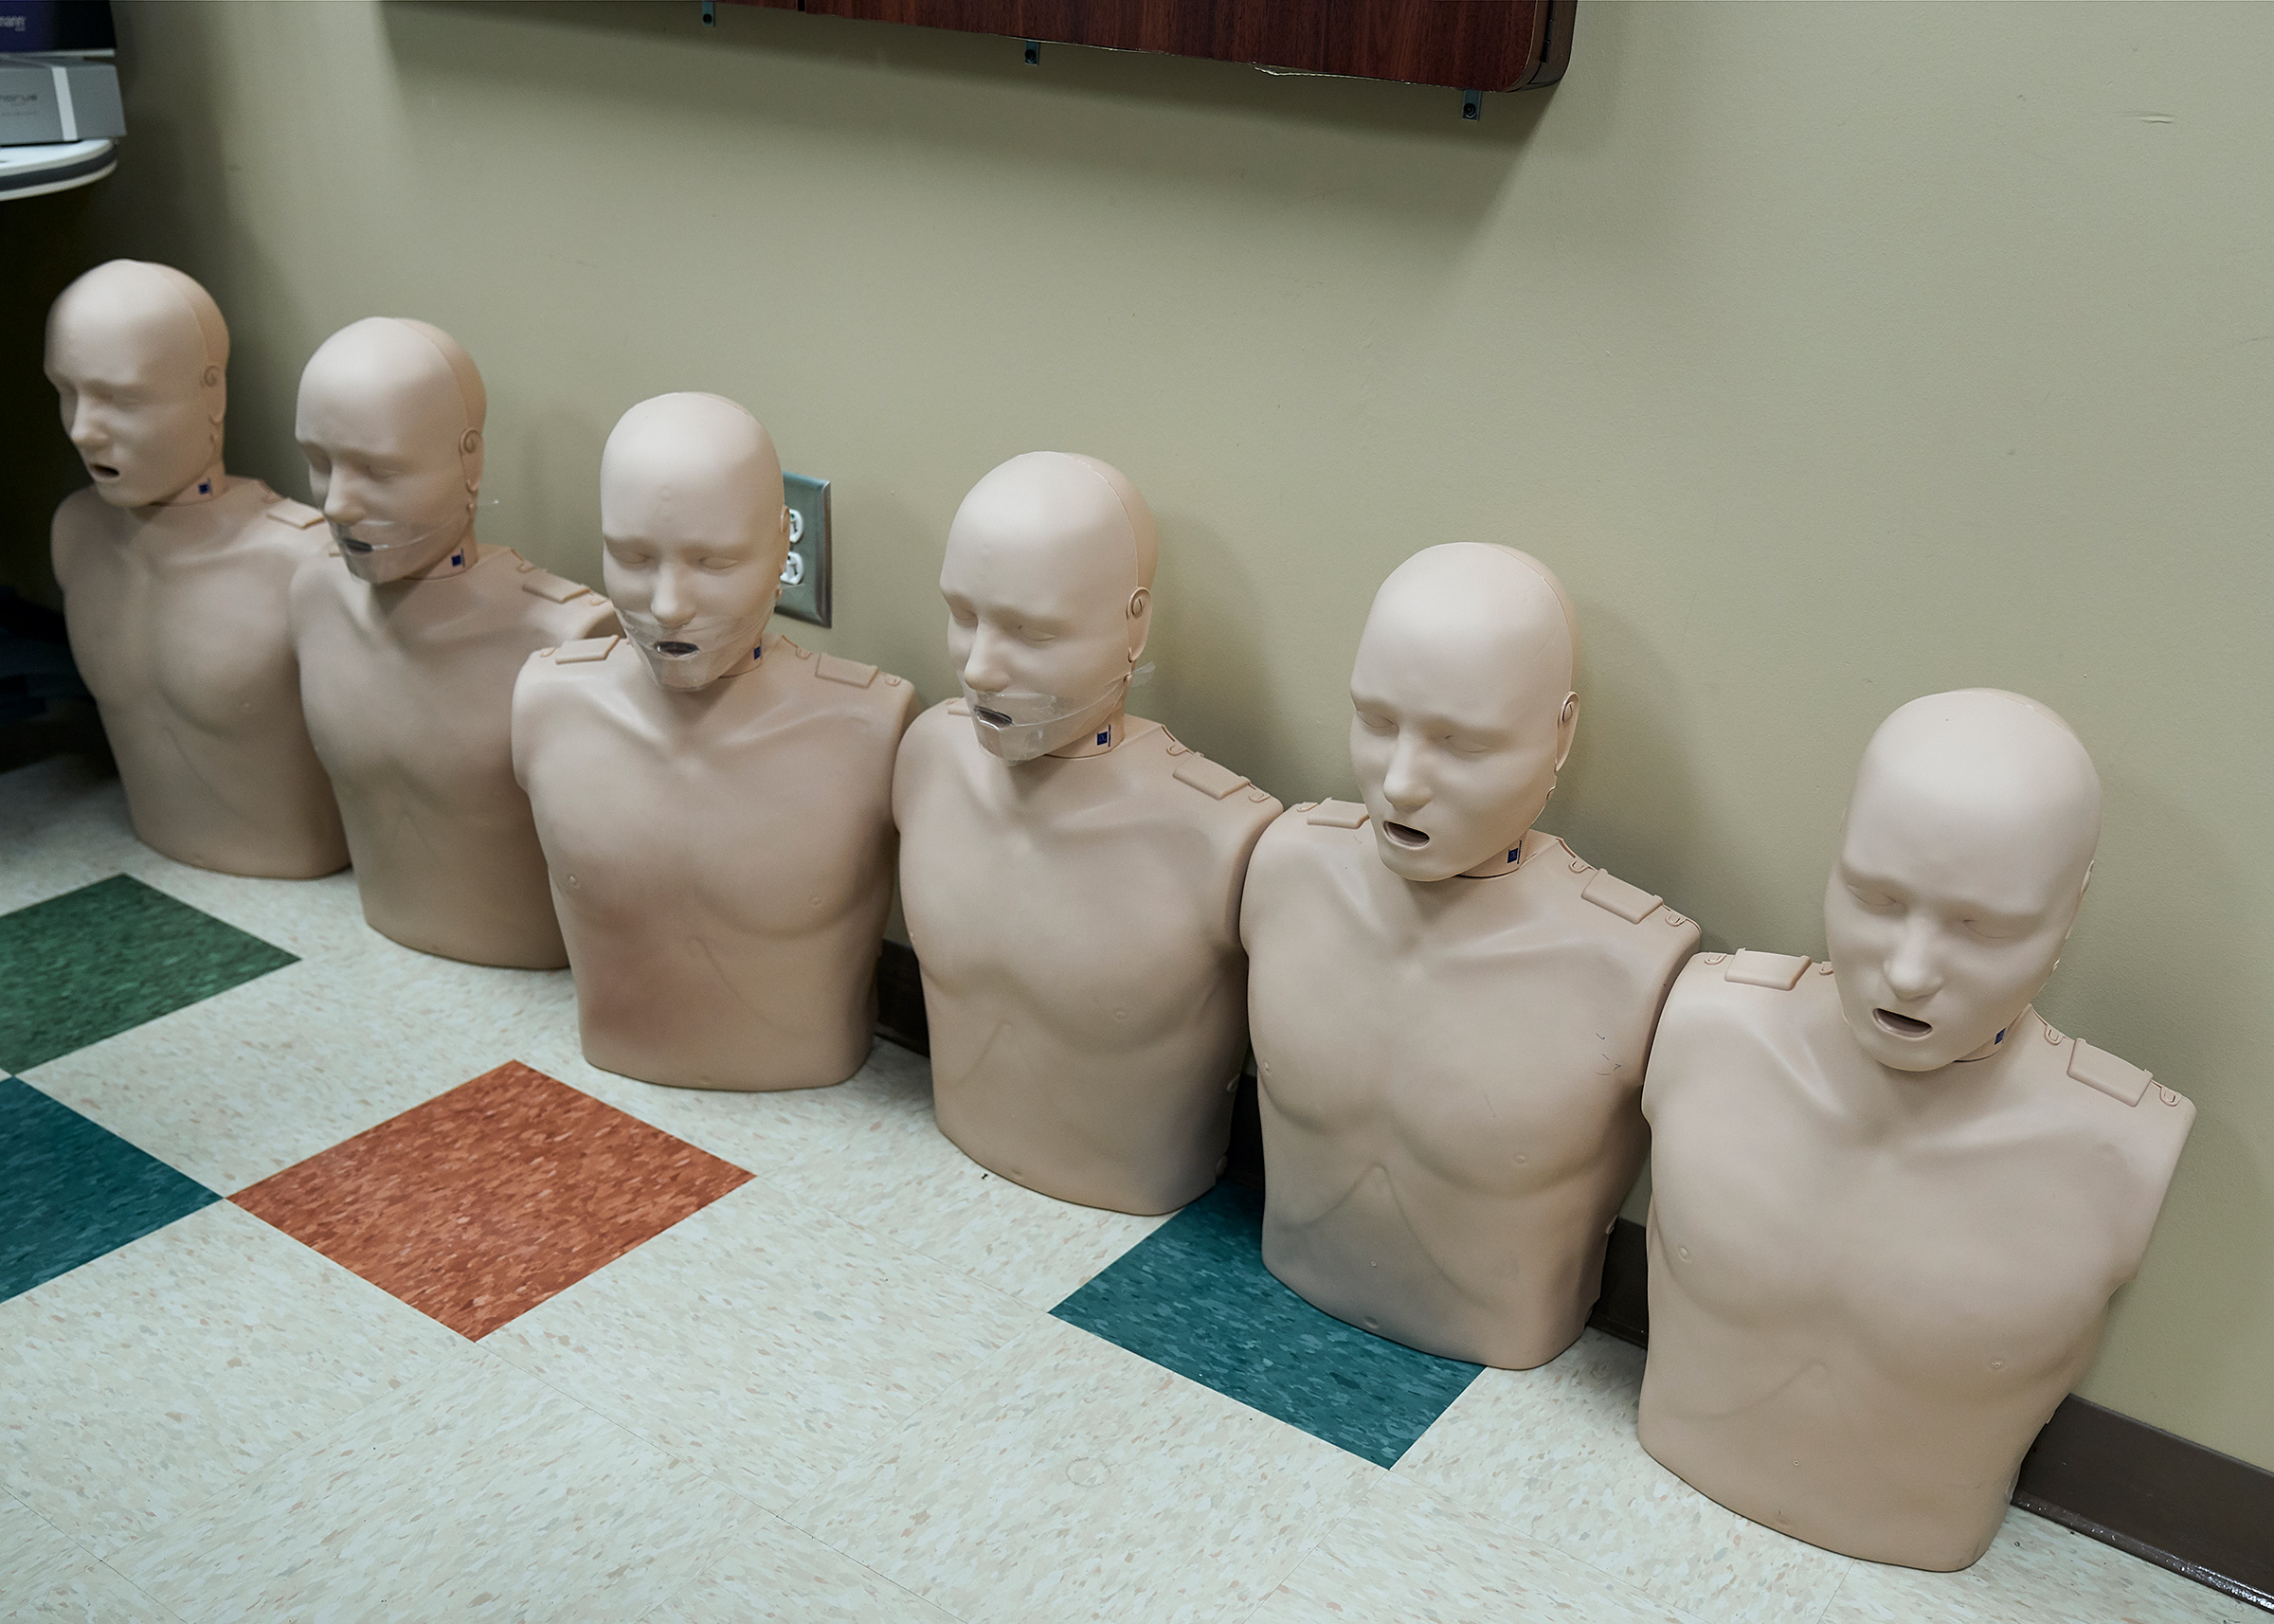 CPR and intubation skills equipment at Clinch Memorial Hospital.